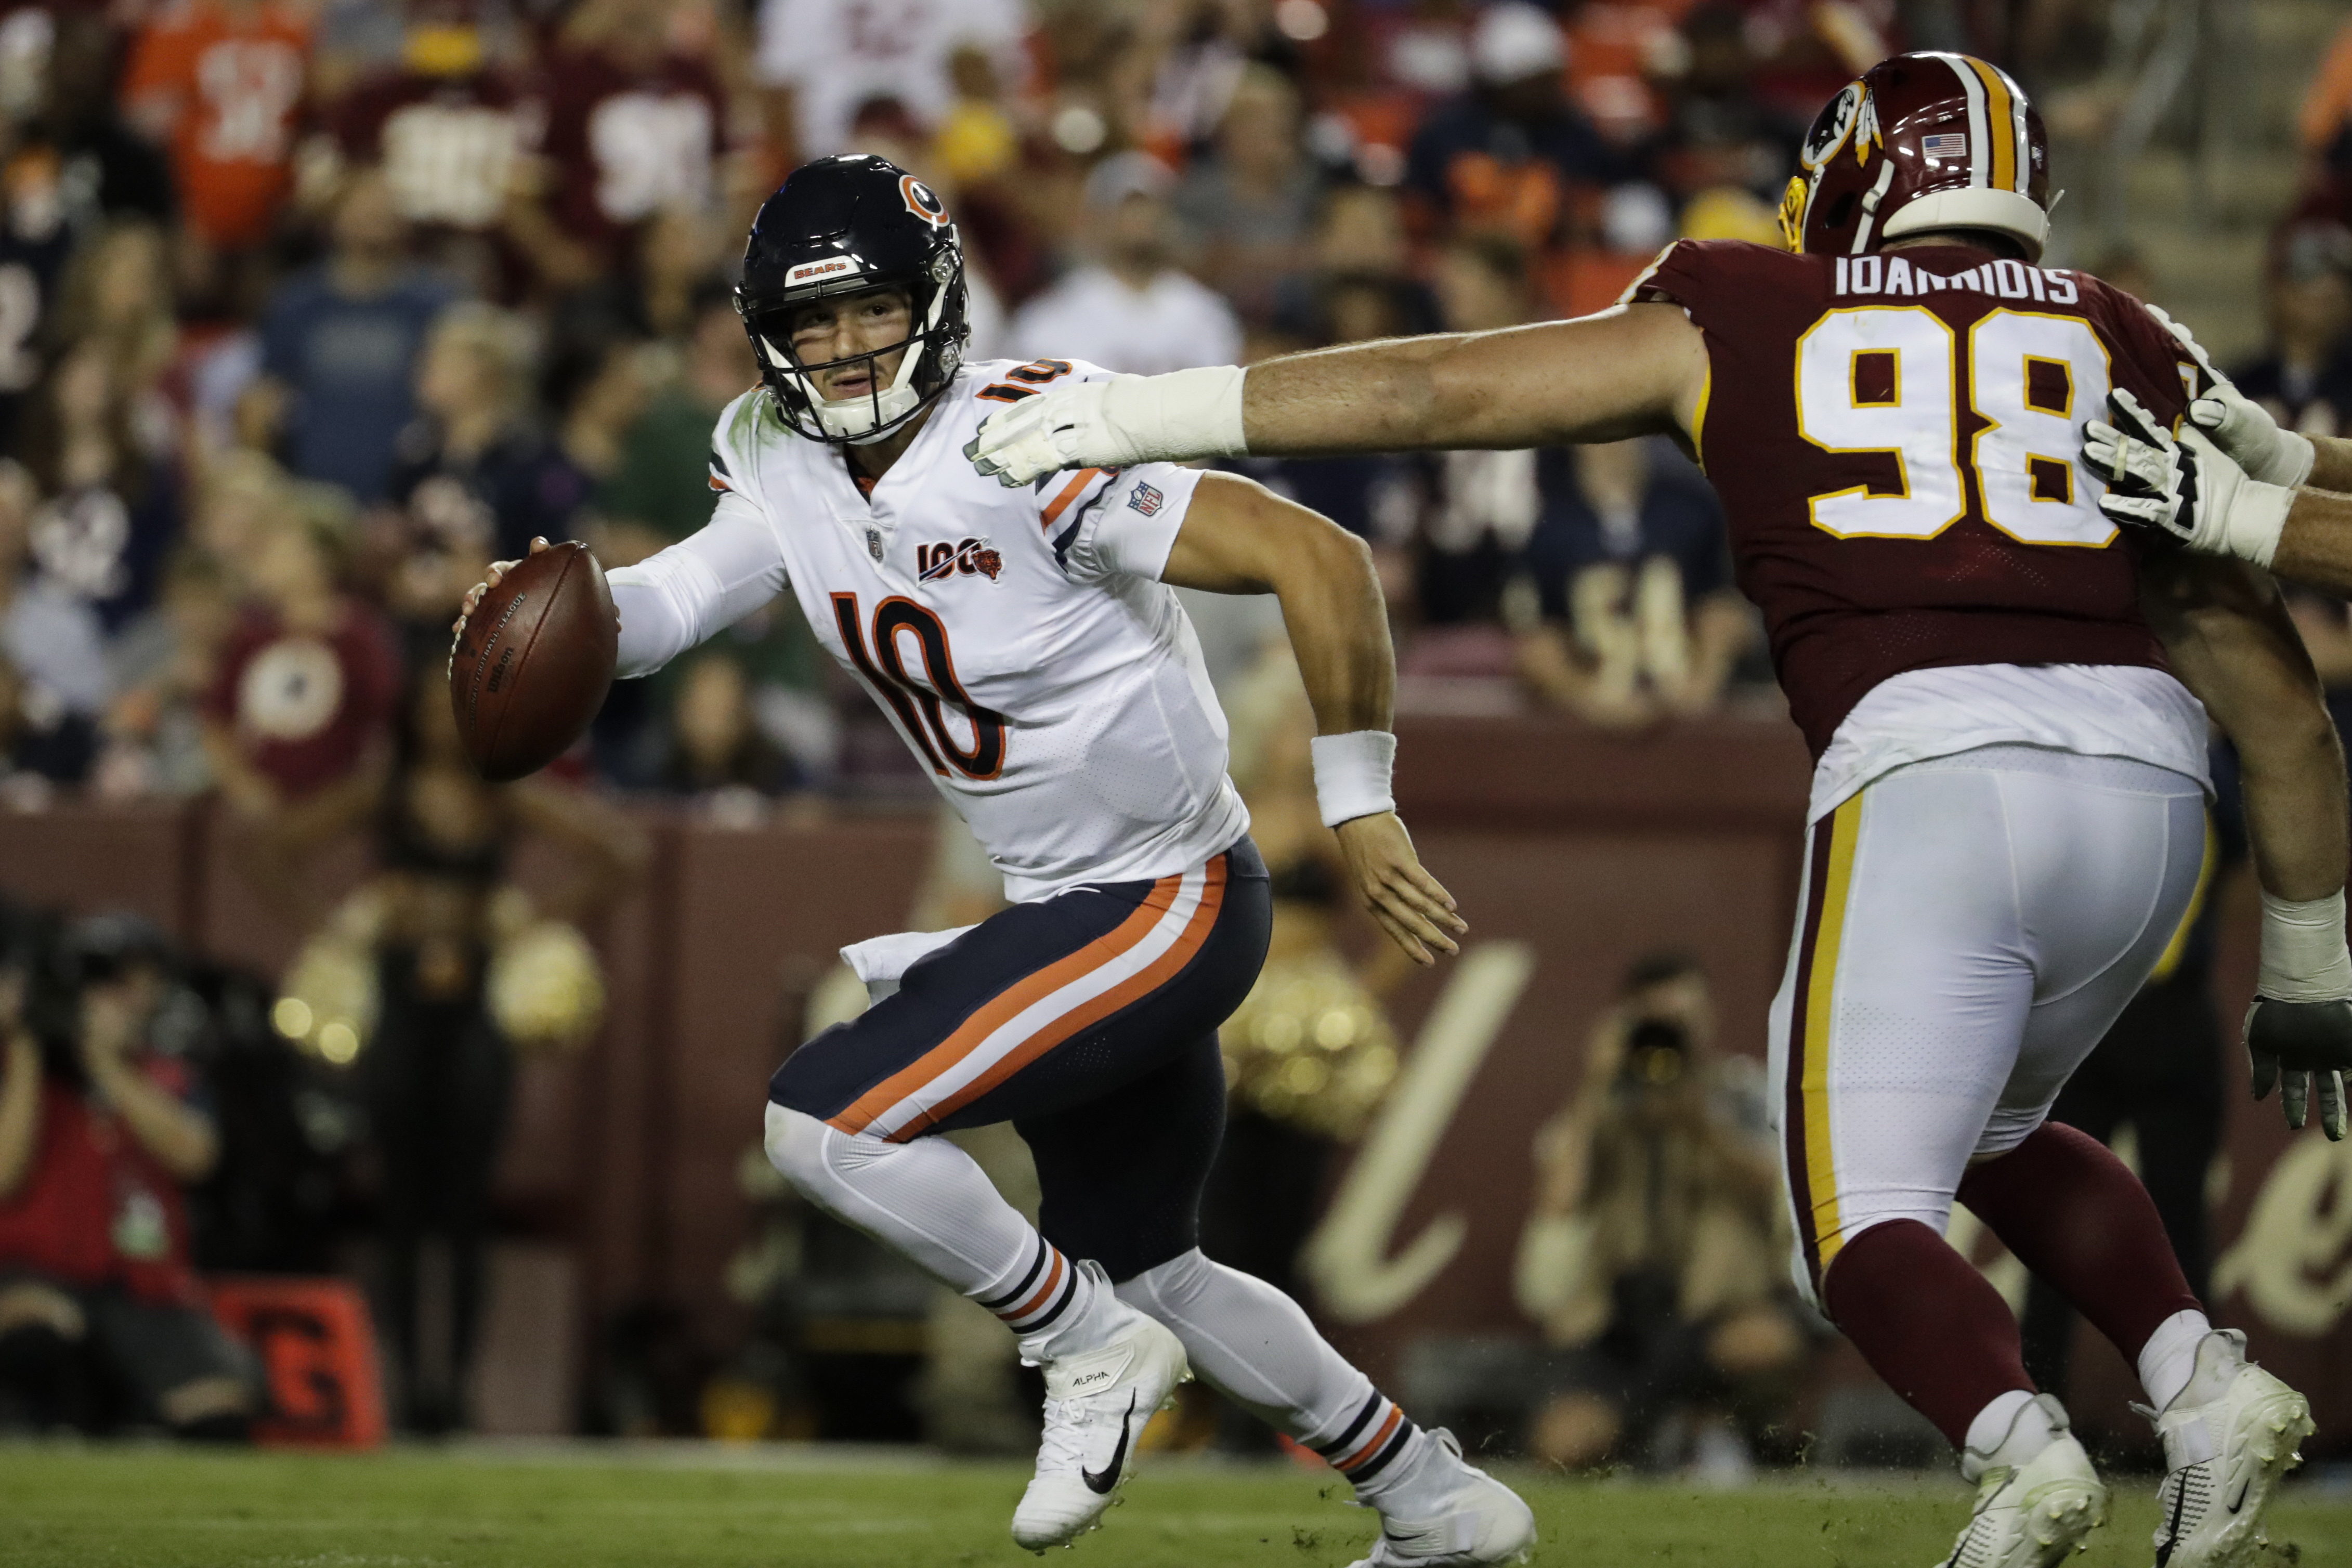 With Trubisky delivering, Bears get relief in lopsided win